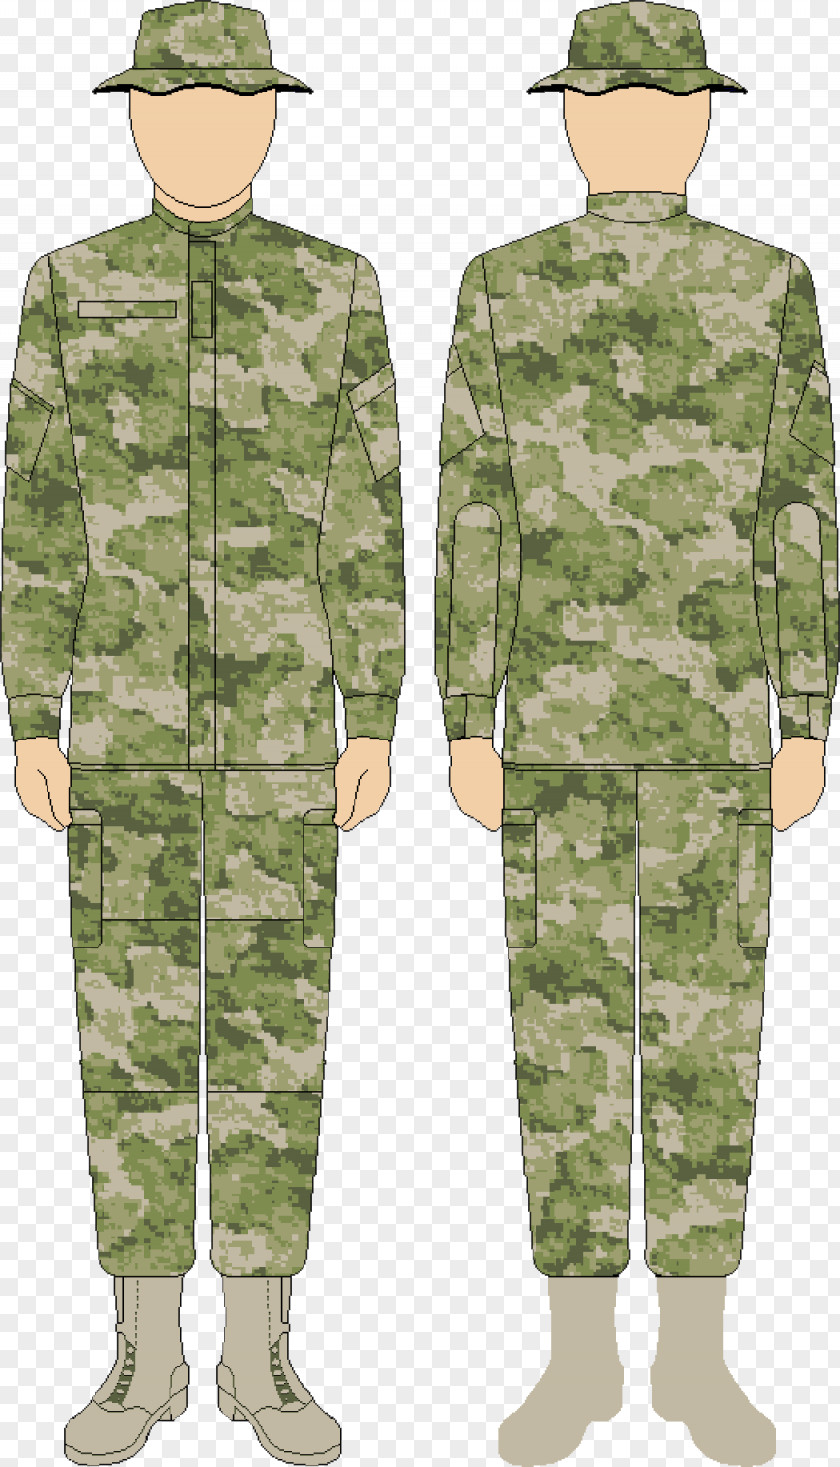 Army Military Camouflage Soldier Uniform PNG